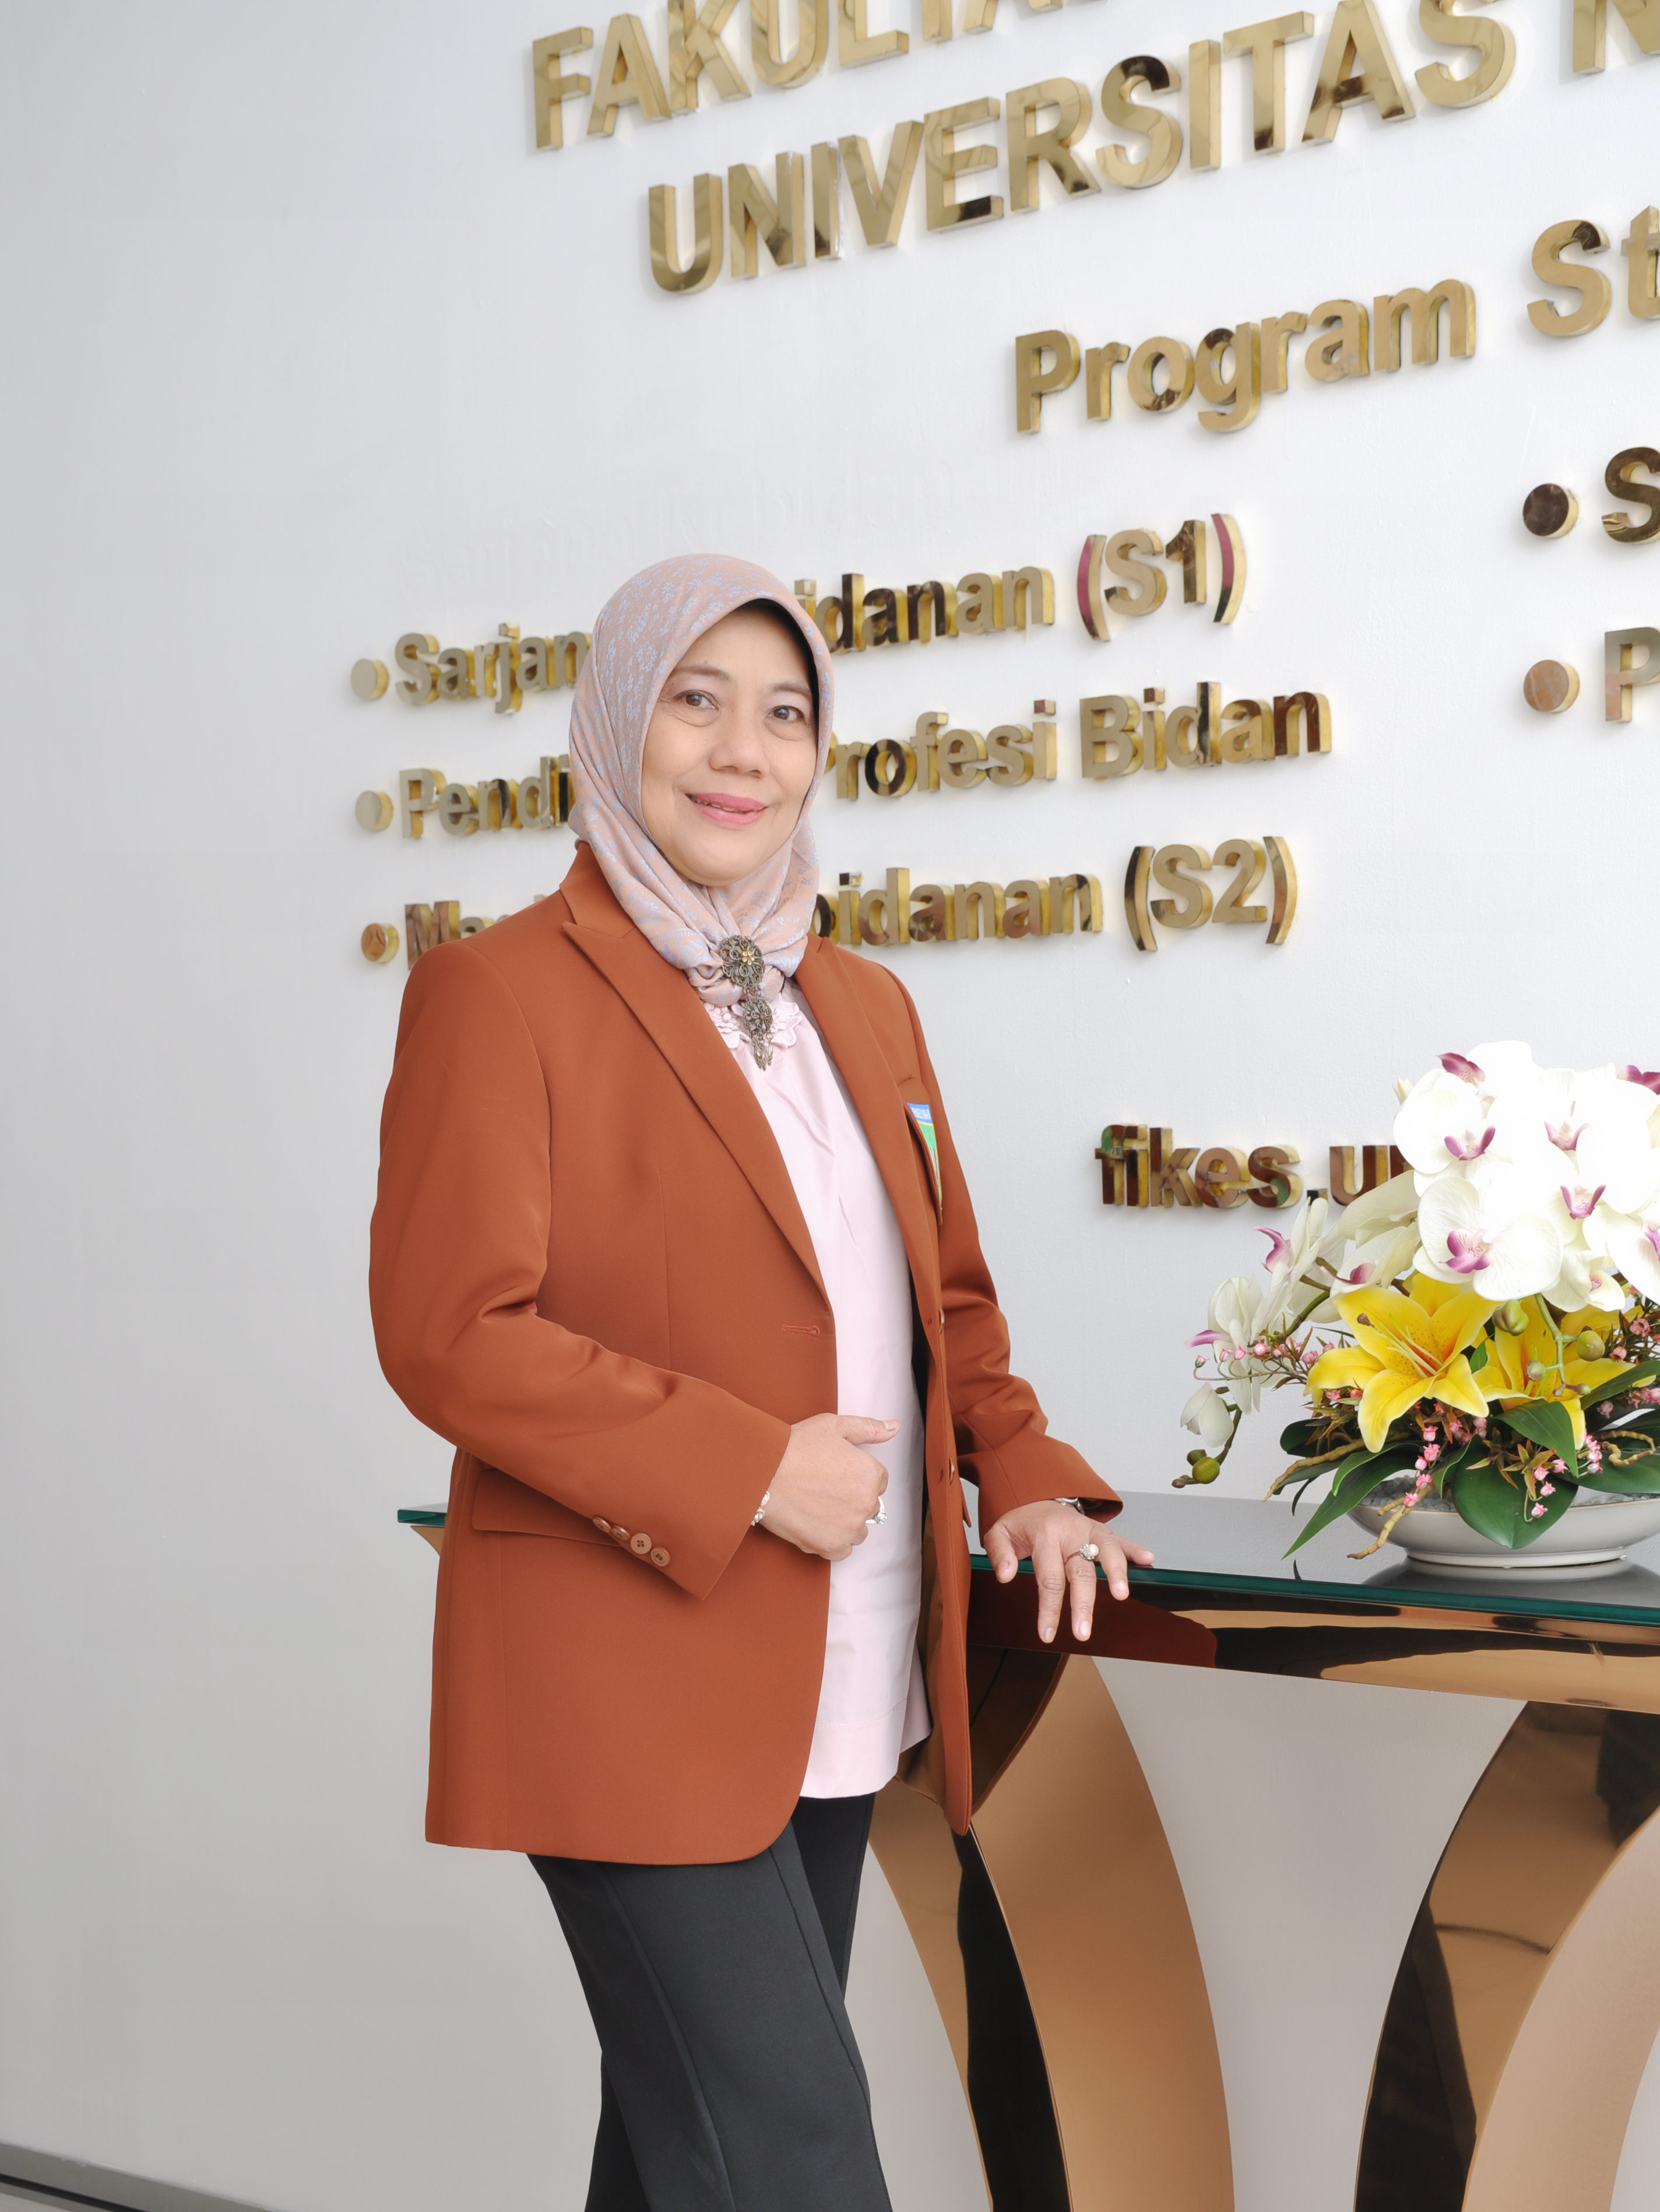 You are currently viewing 17. Dr. dr. Andi Julia Rifiana, S.H., M.Kes